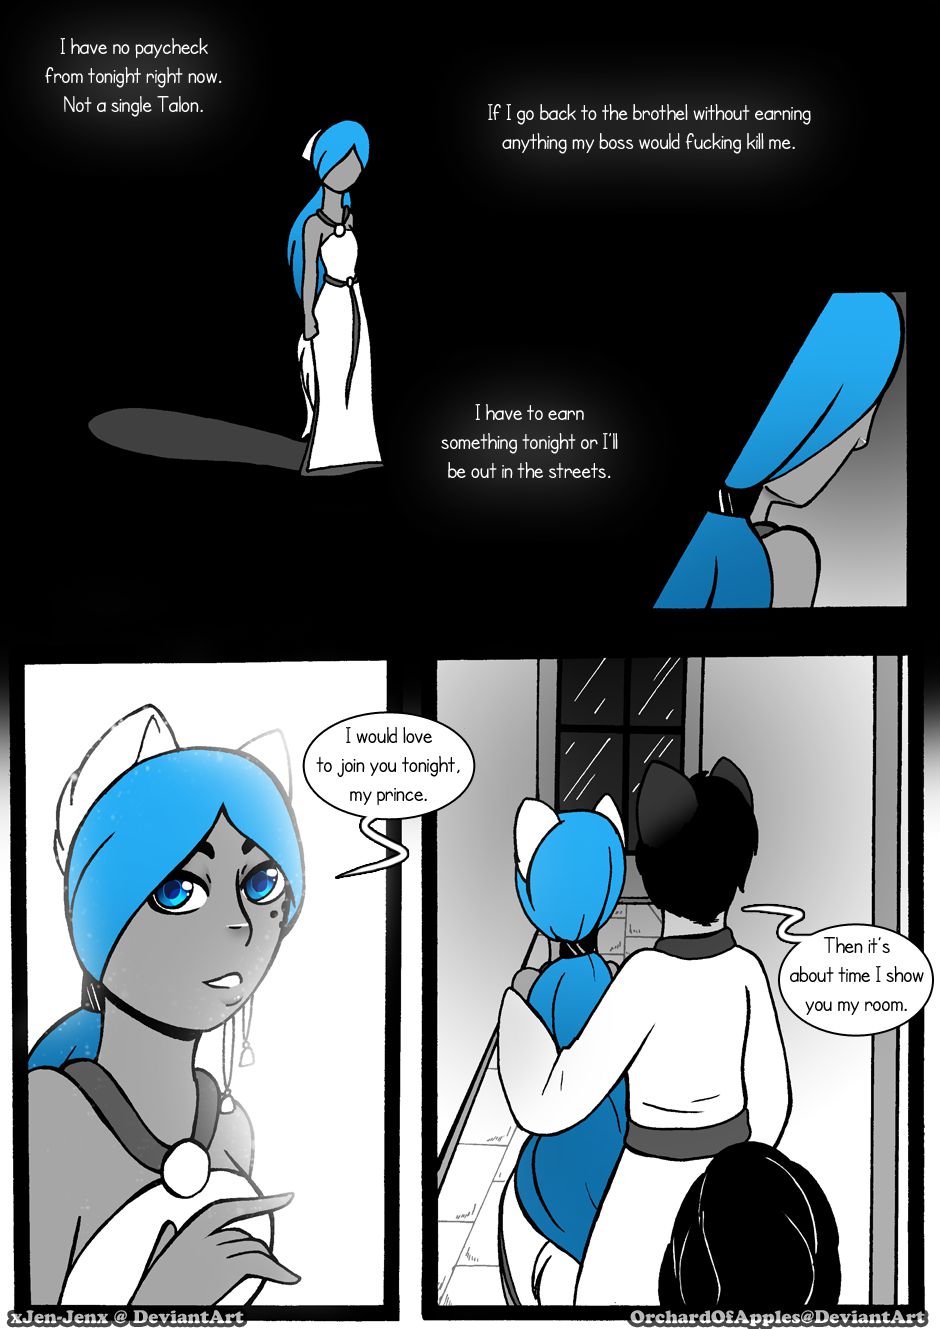 [Jeny-jen94] Between Kings and Queens [Ongoing] 130